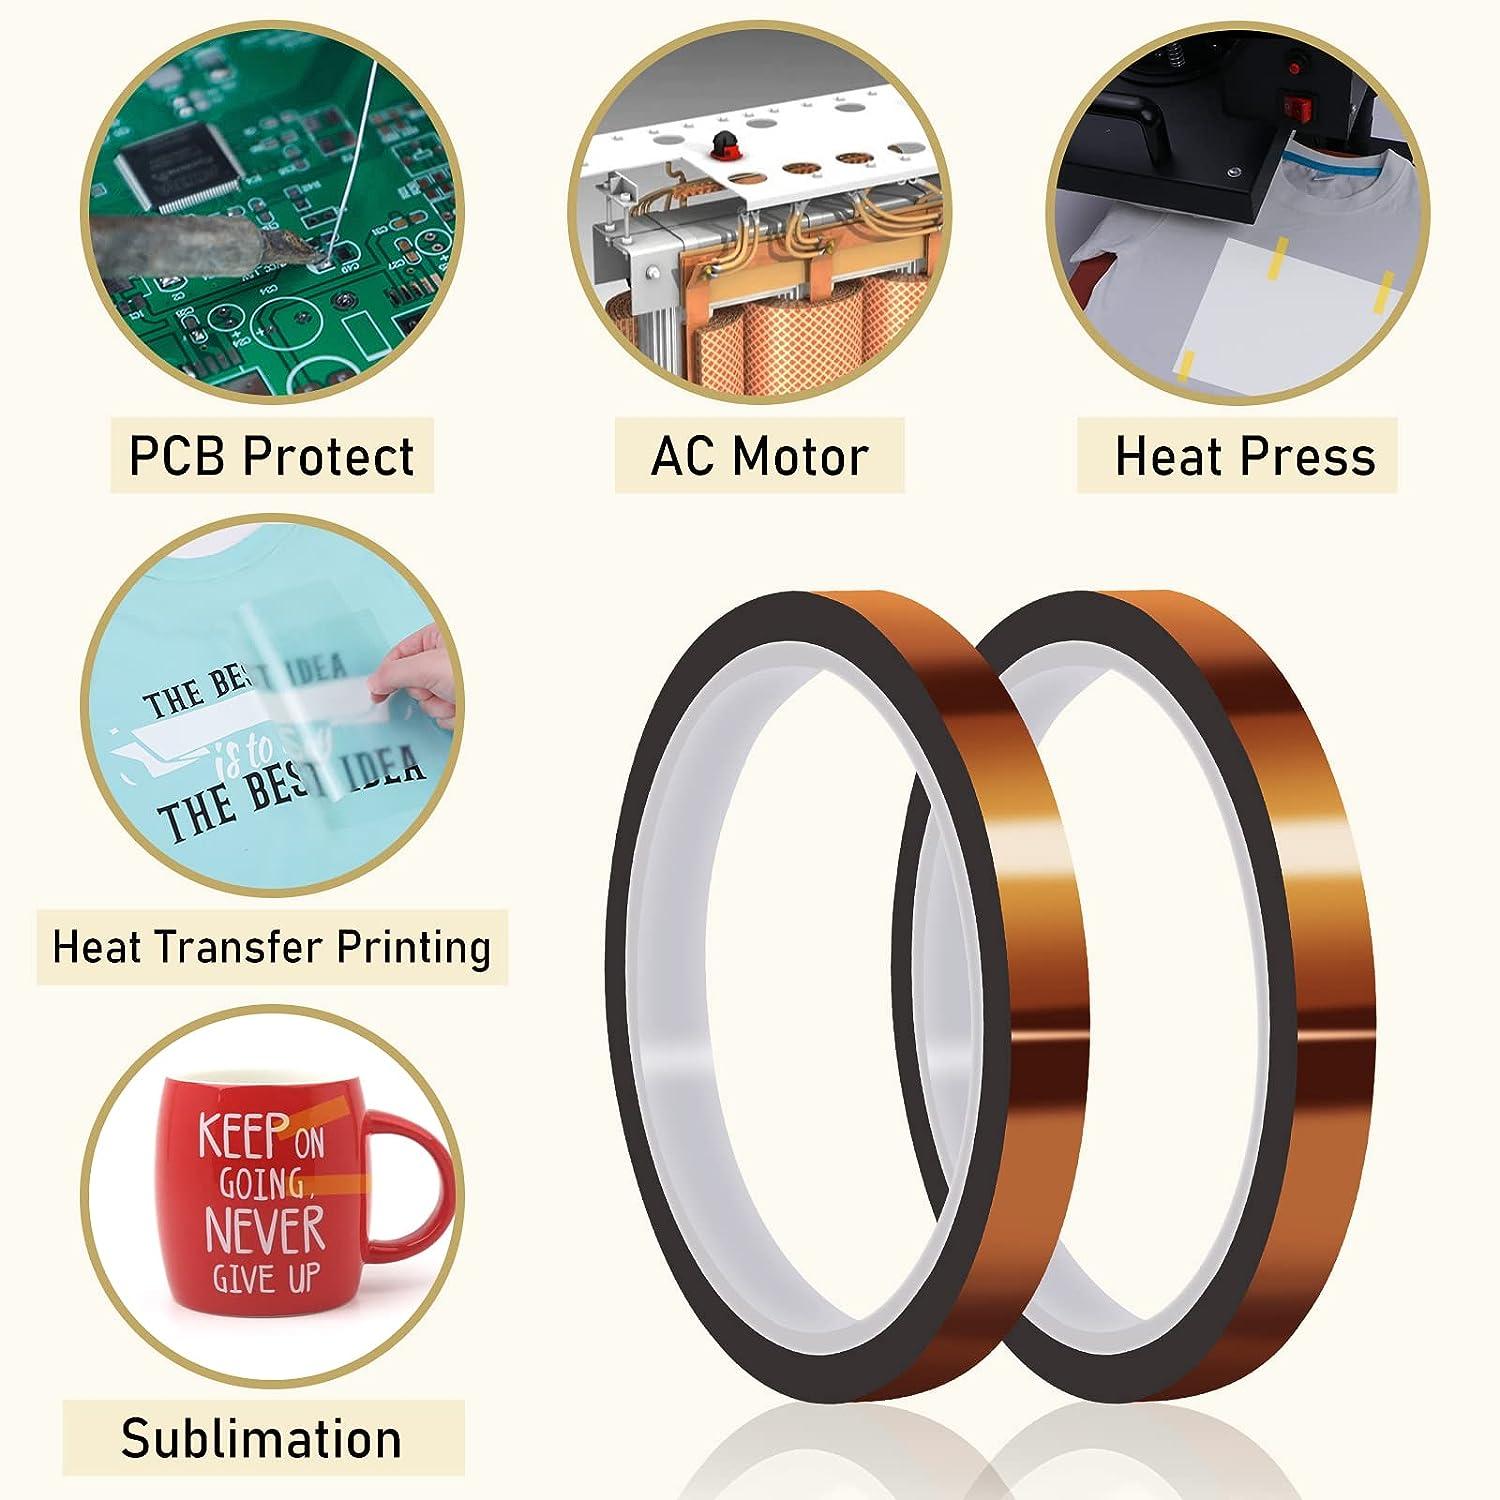 Heat Resistant Tape for Sublimation & HTV